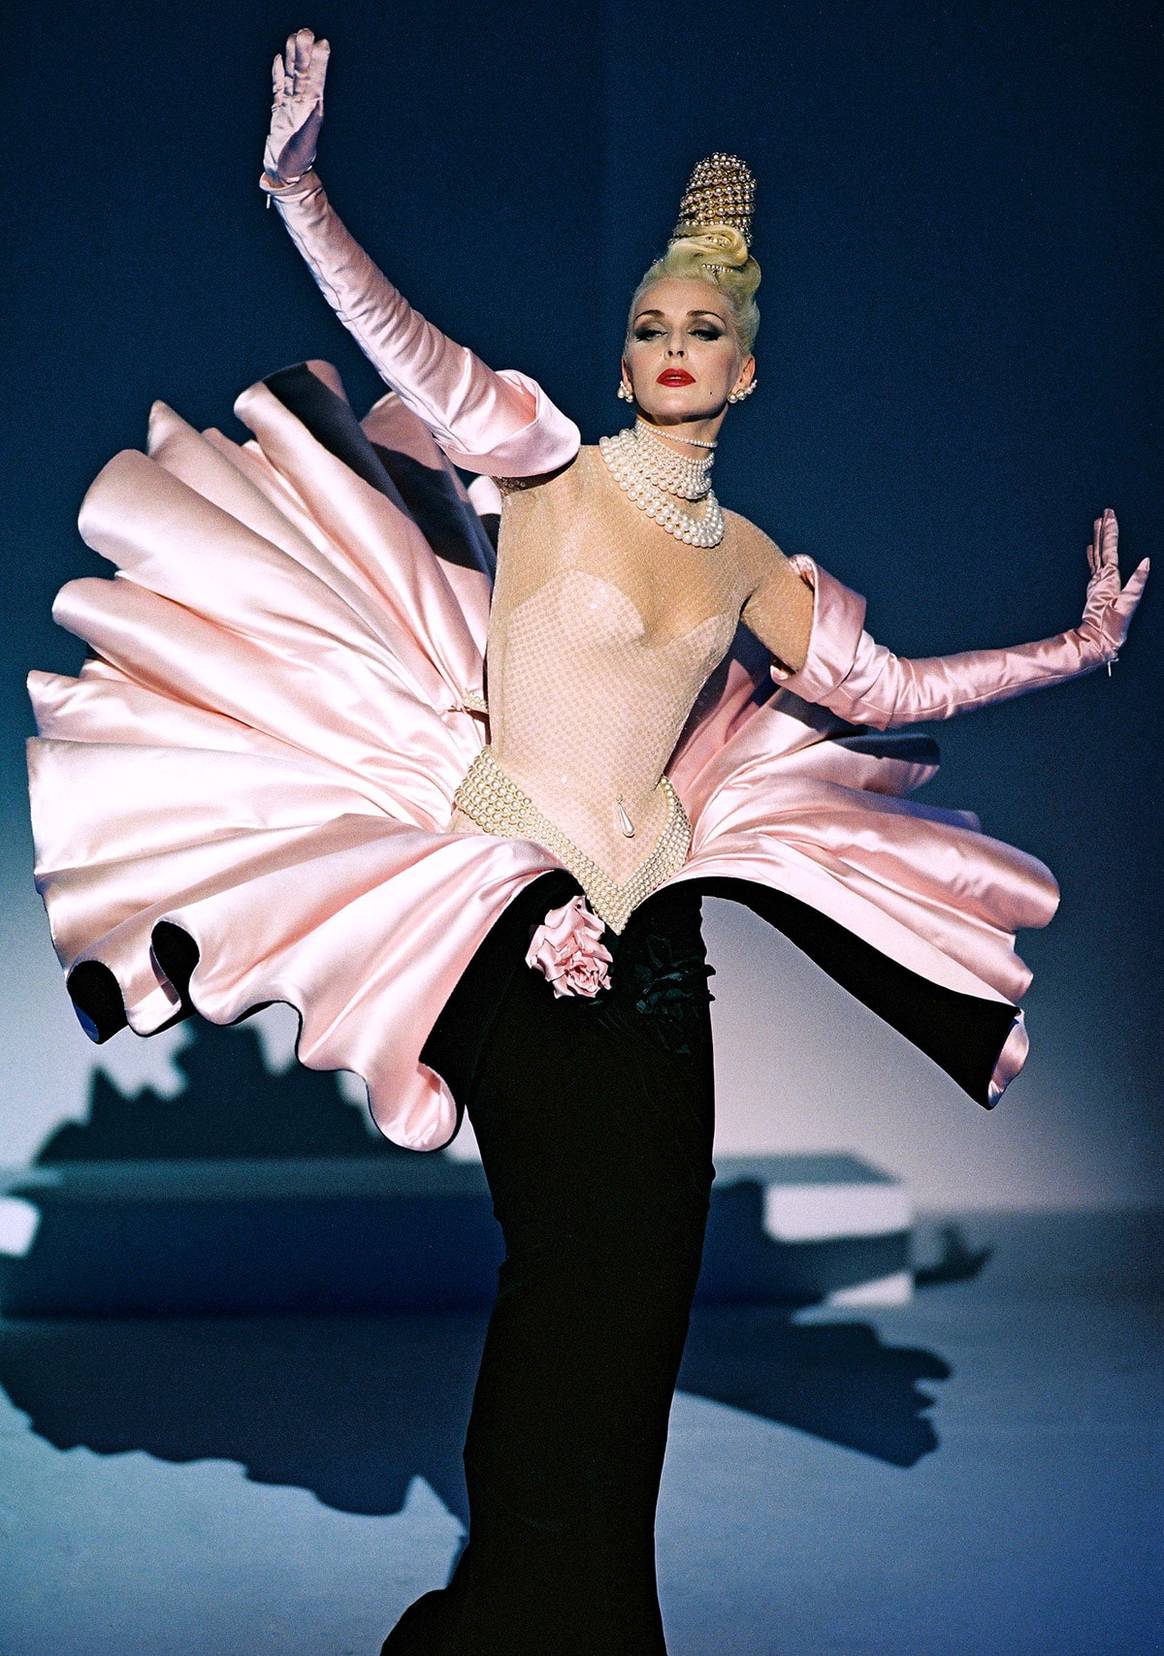 Image: Anniversaire des 20 ans collection — Haute couture fall/winter 1995-1996 © Patrice Stable